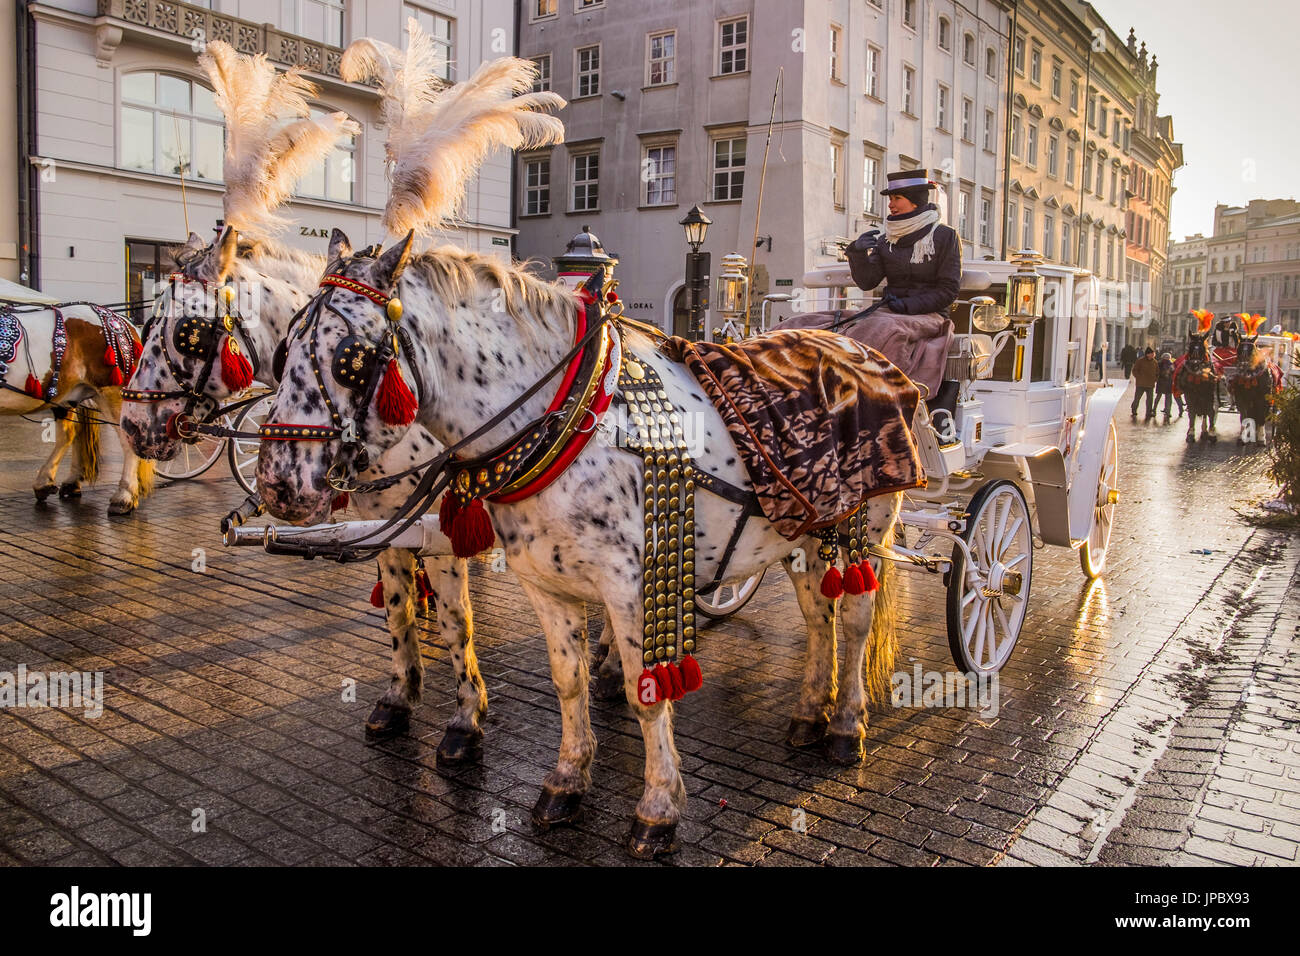 Krakow, Poland, North East Europe. Horse drawn carriages in Main Market Square. Stock Photo